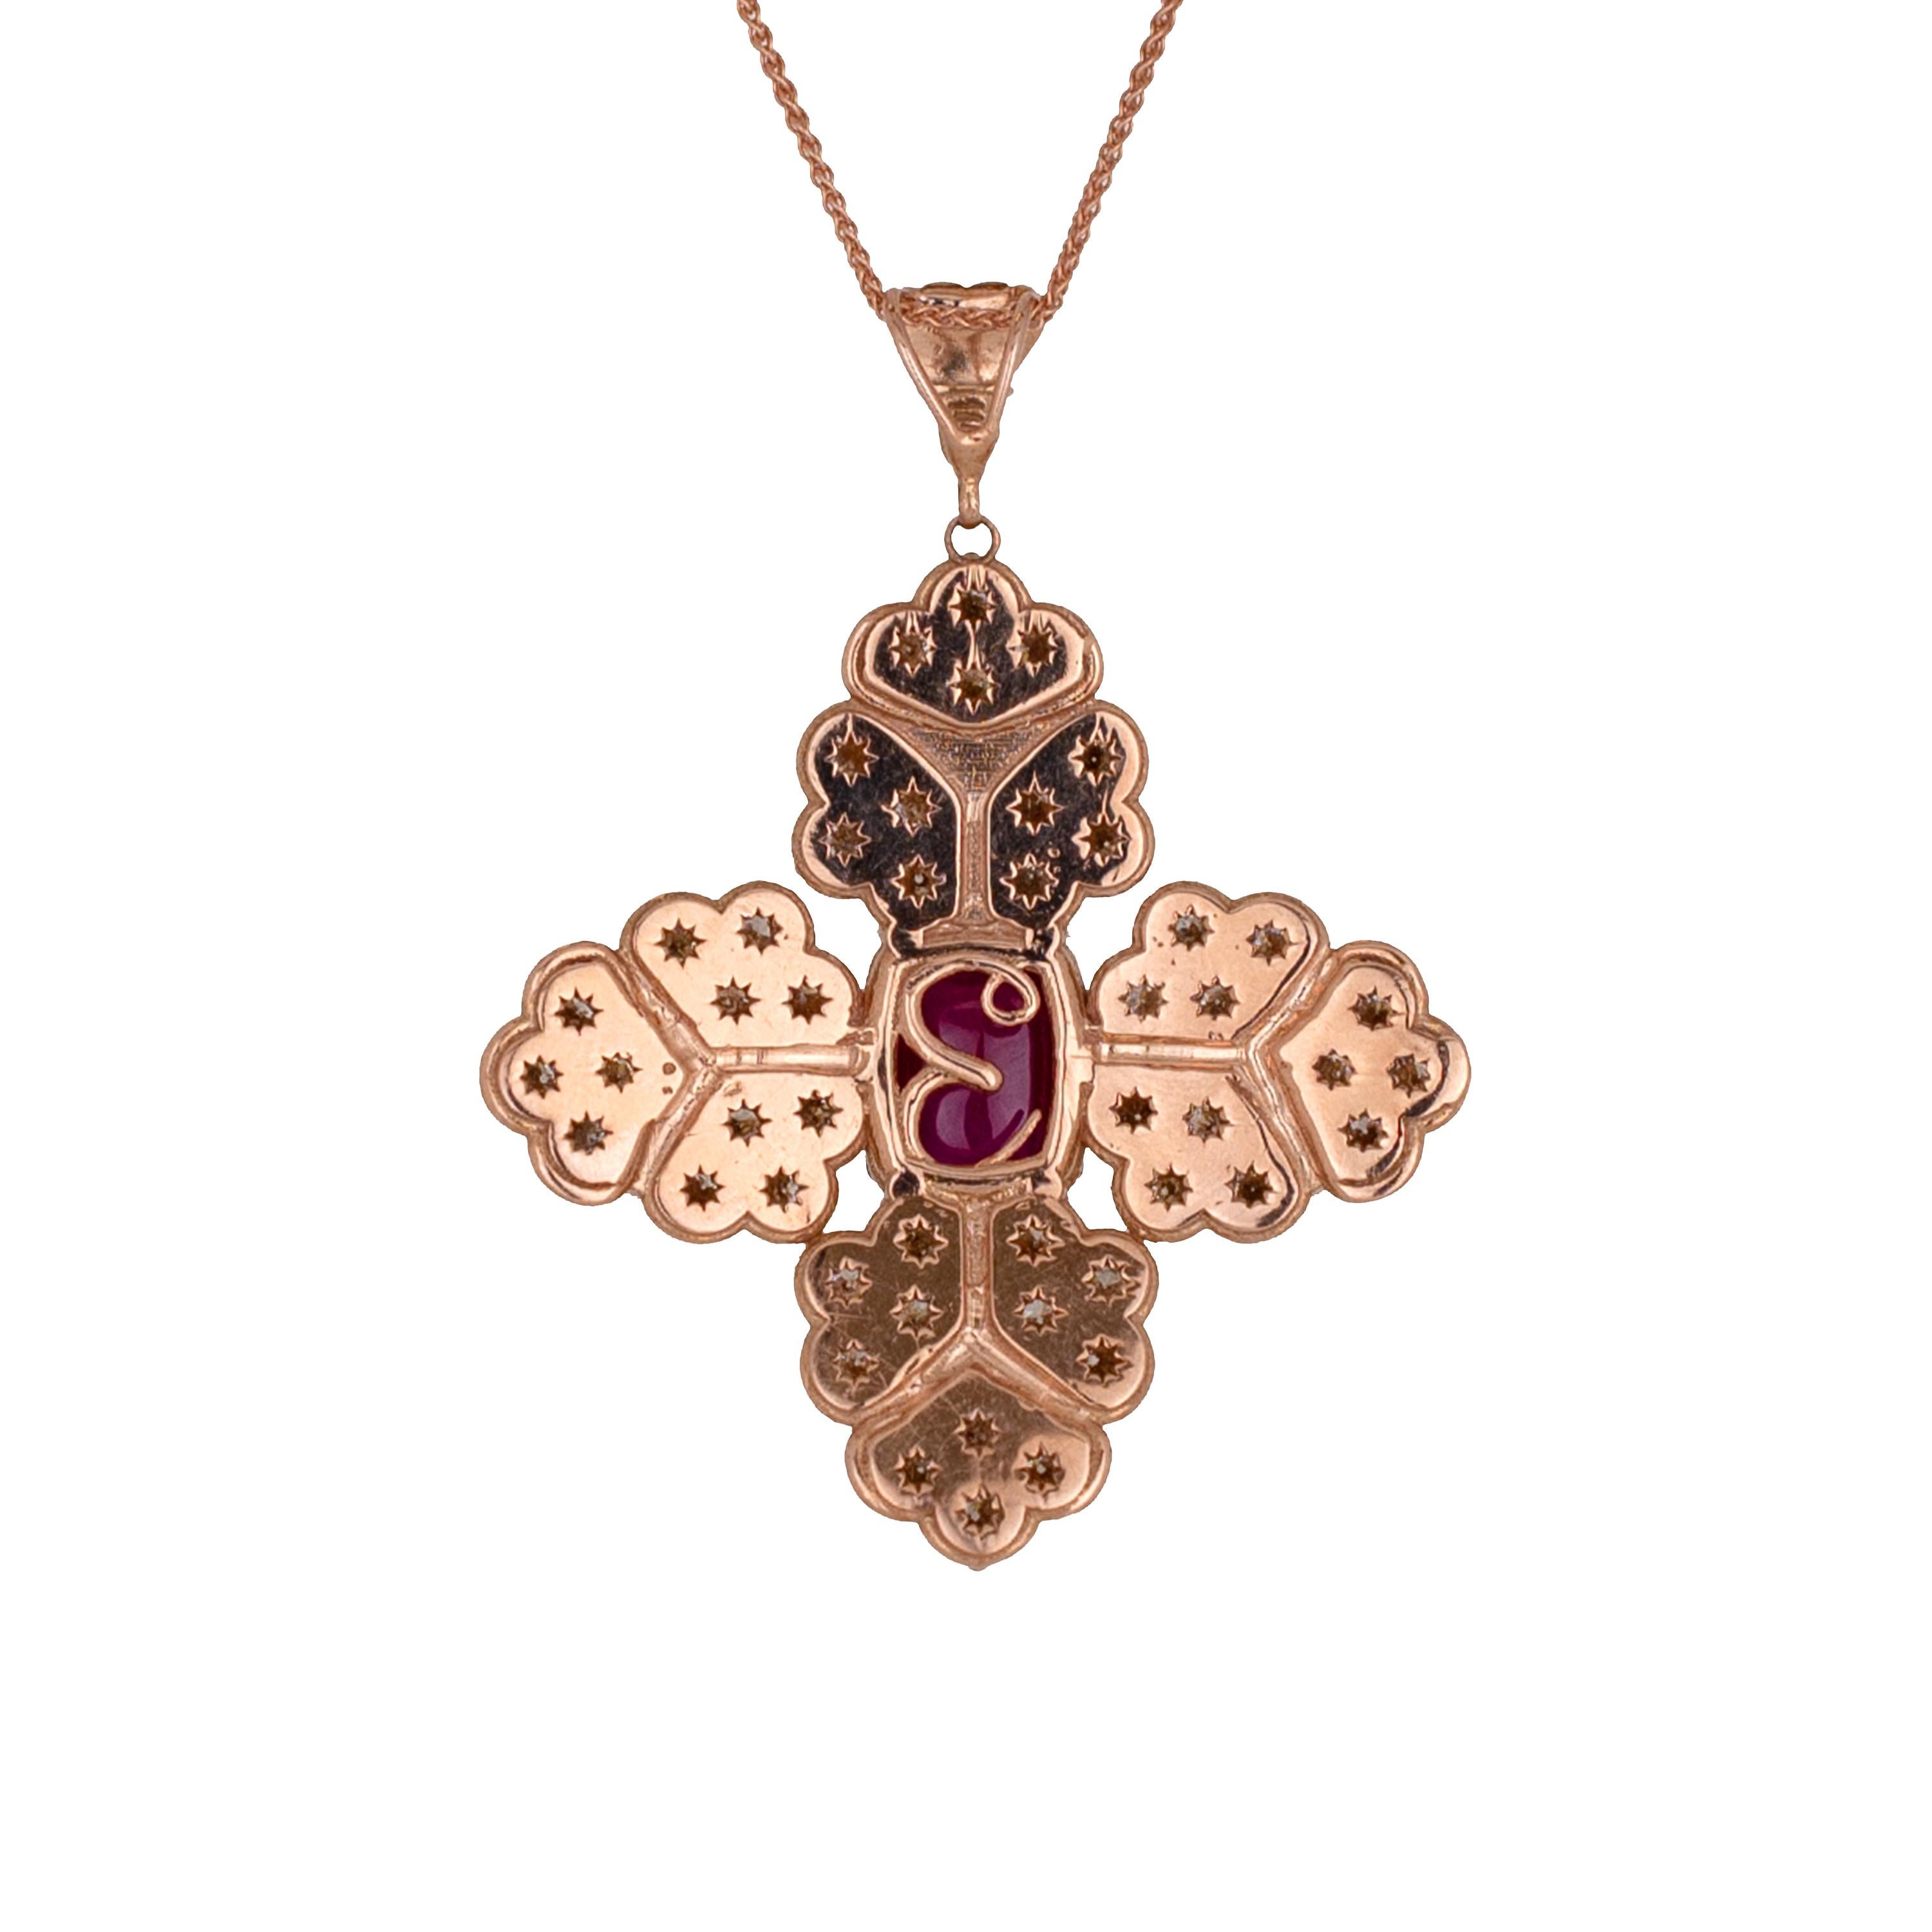 A wonderful display of artistry is shown in this classic vintage inspired pendant.  The center stone is a ruby sugarloaf cabochon that measures,  11.18 x 9.14 x 7.26mm, the center stone has rich red color and is eye clean.  The center stone is